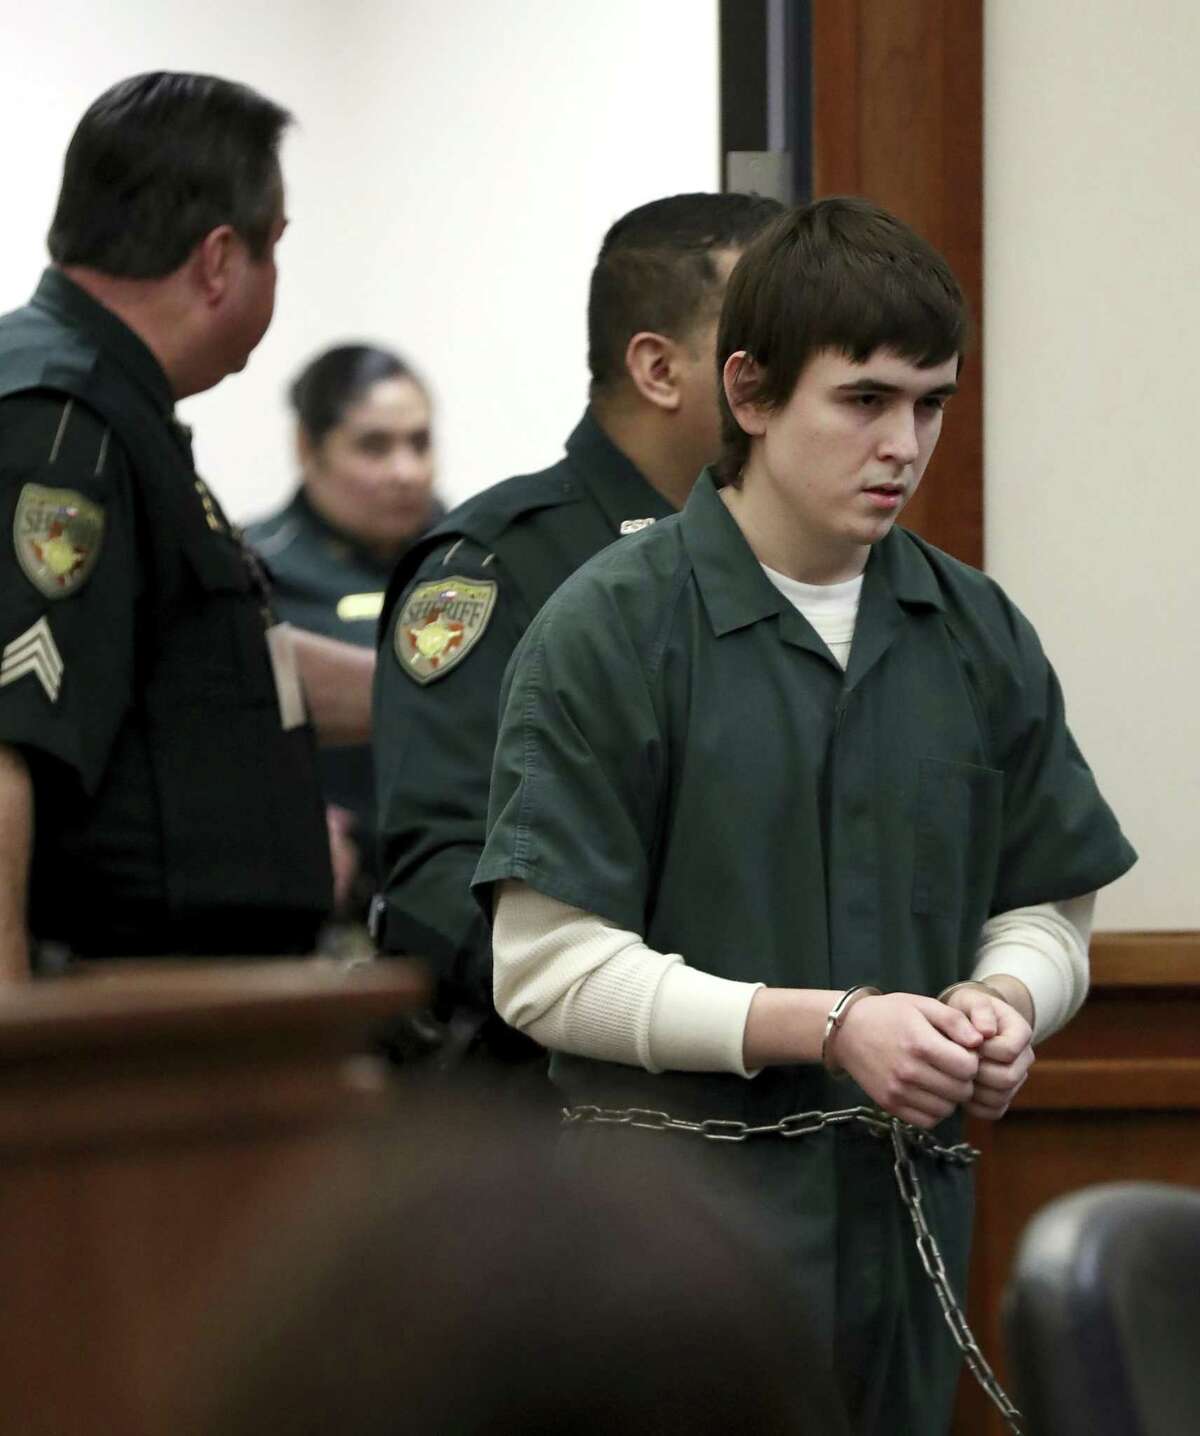 Dimitrios Pagourtzis, the Santa Fe High School student accused of killing 10 people in a May 18 shooting at the high school, is escorted by Galveston County Sheriff's Office deputies into the jury assembly room for a change of venue hearing at the Galveston County Courthouse in Galveston, Texas on Monday, Feb. 25, 2019. The trial of Pagourtzis may be delayed for a year as federal investigators have yet to deliver key evidence, prosecutors said Monday.